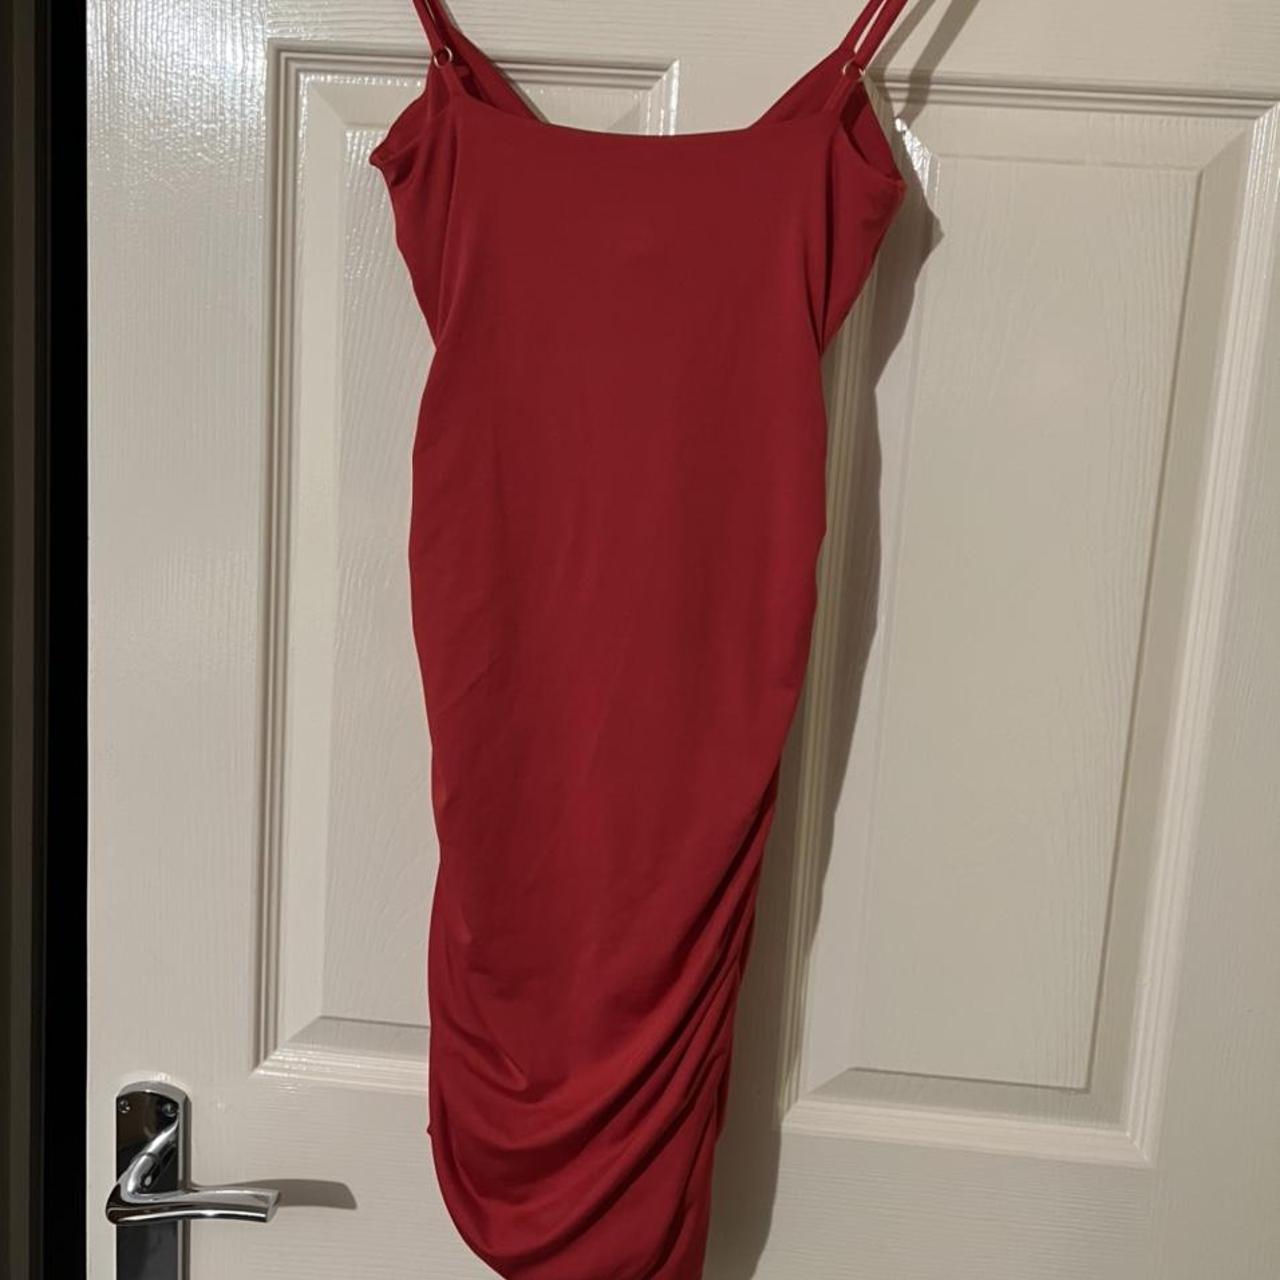 Oh Polly ruched bodycon dress worn once in great - Depop